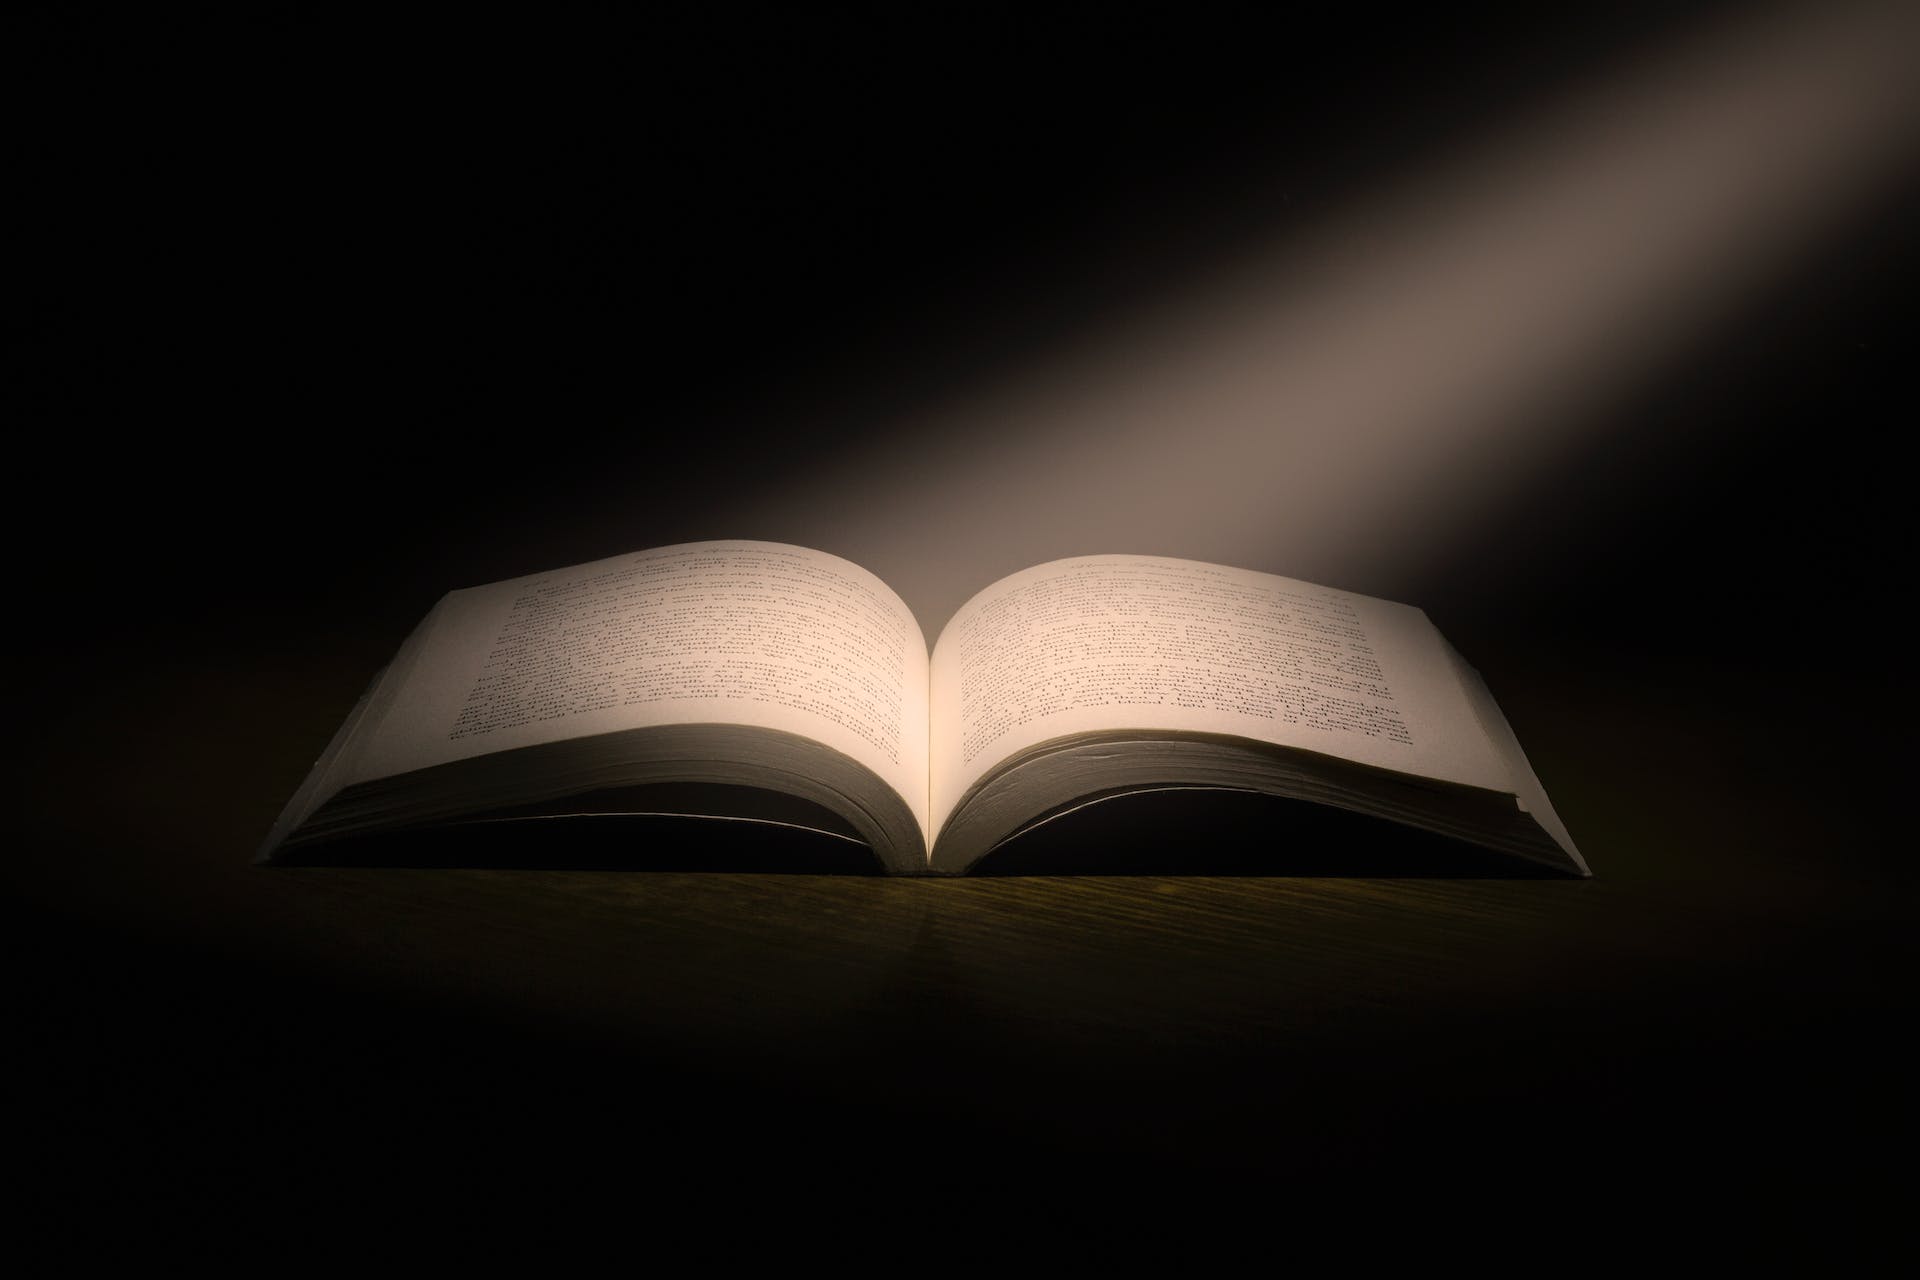 book lying open against a dark background with shaft of light illuminating the book